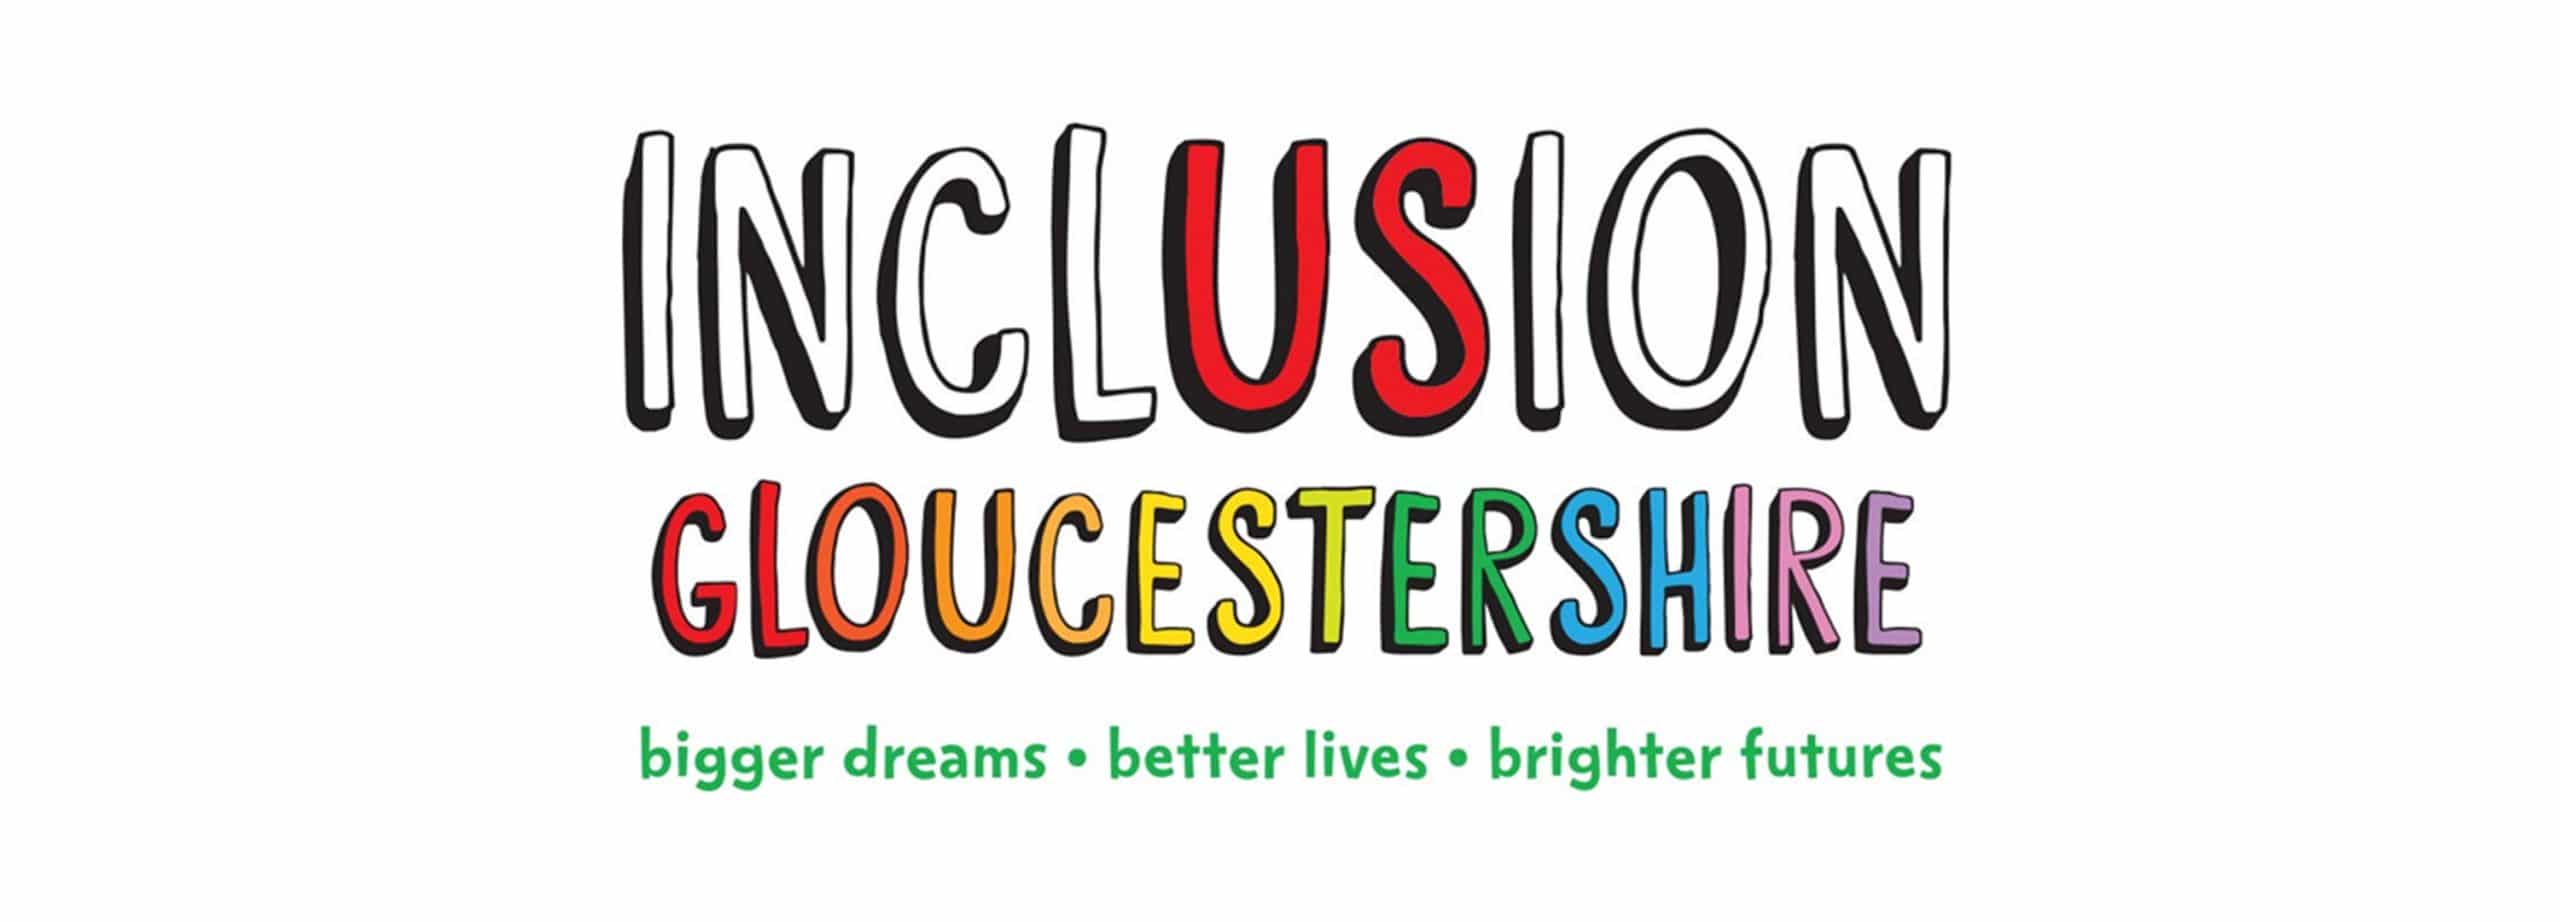 Inclusion Gloucestershire - Bigger dreams, better lives, brighter futures